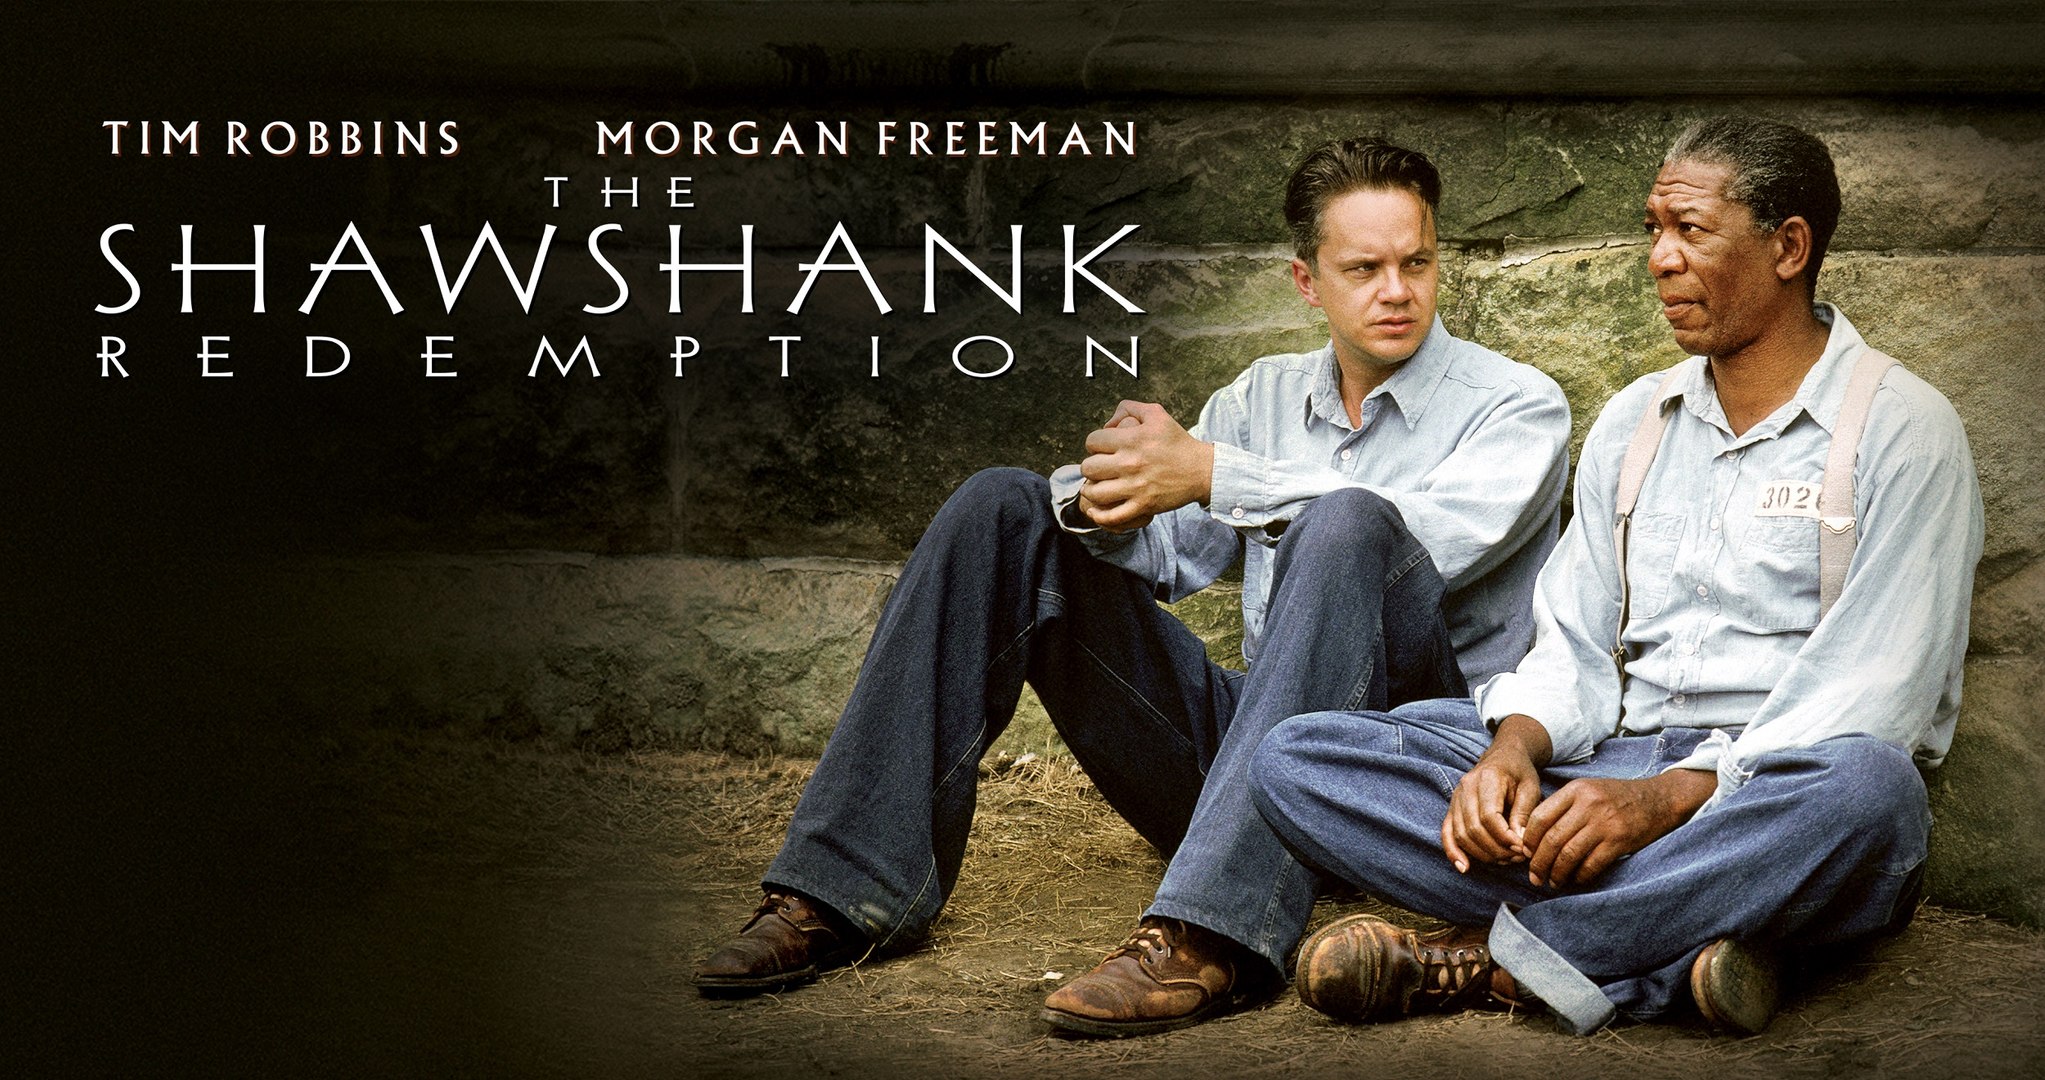 46-facts-about-the-movie-the-shawshank-redemption